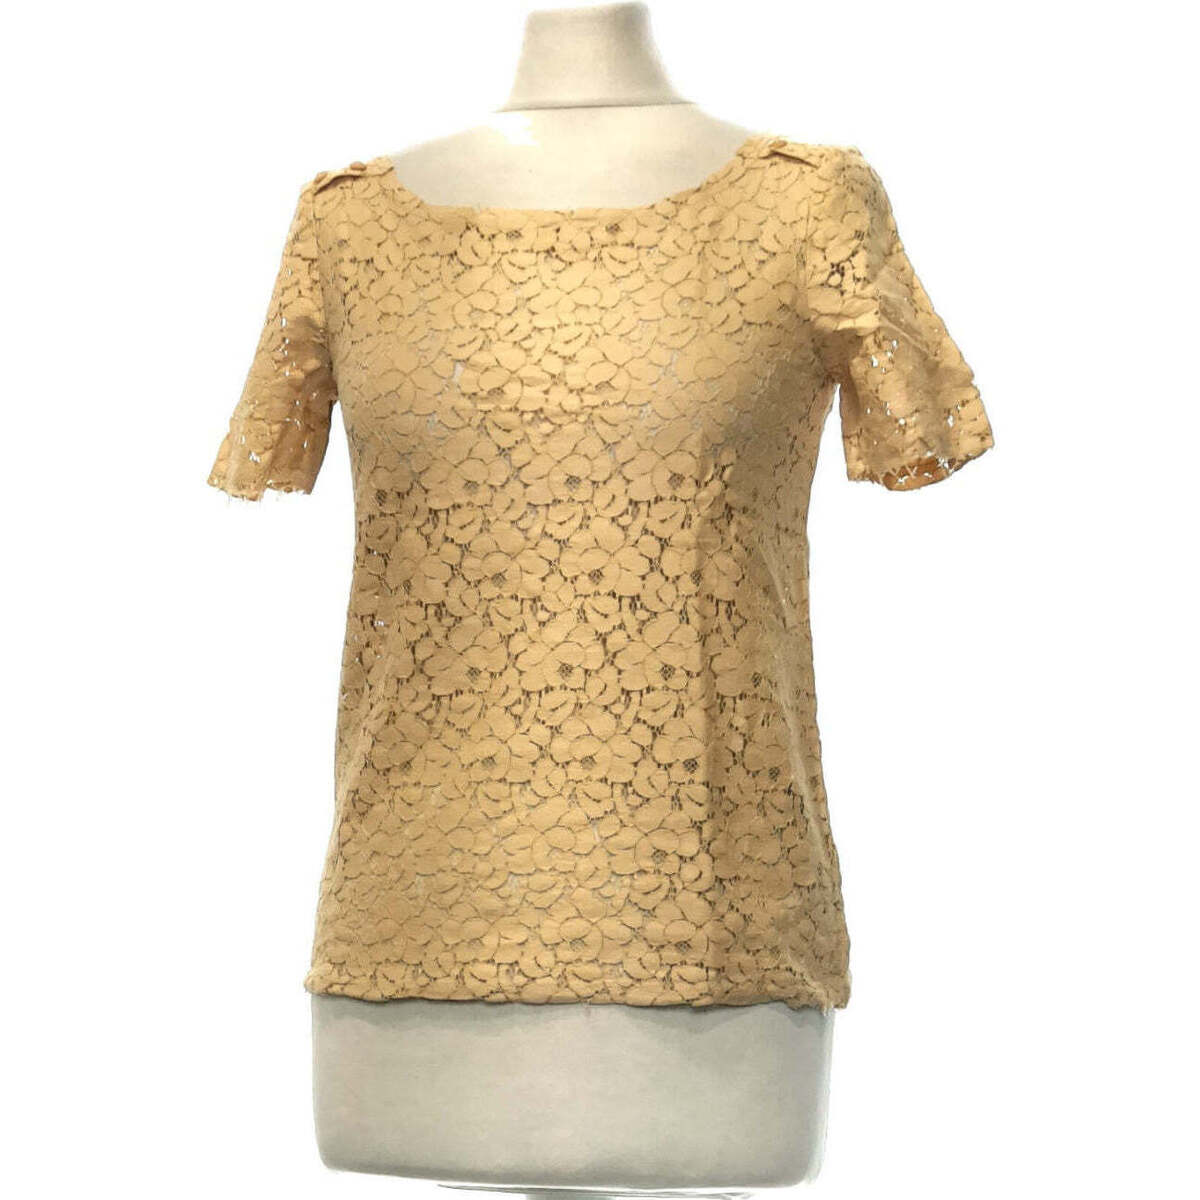 Vêtements Femme The Couture Club relaxed t-shirt with reflective print in white 36 - T1 - S Beige